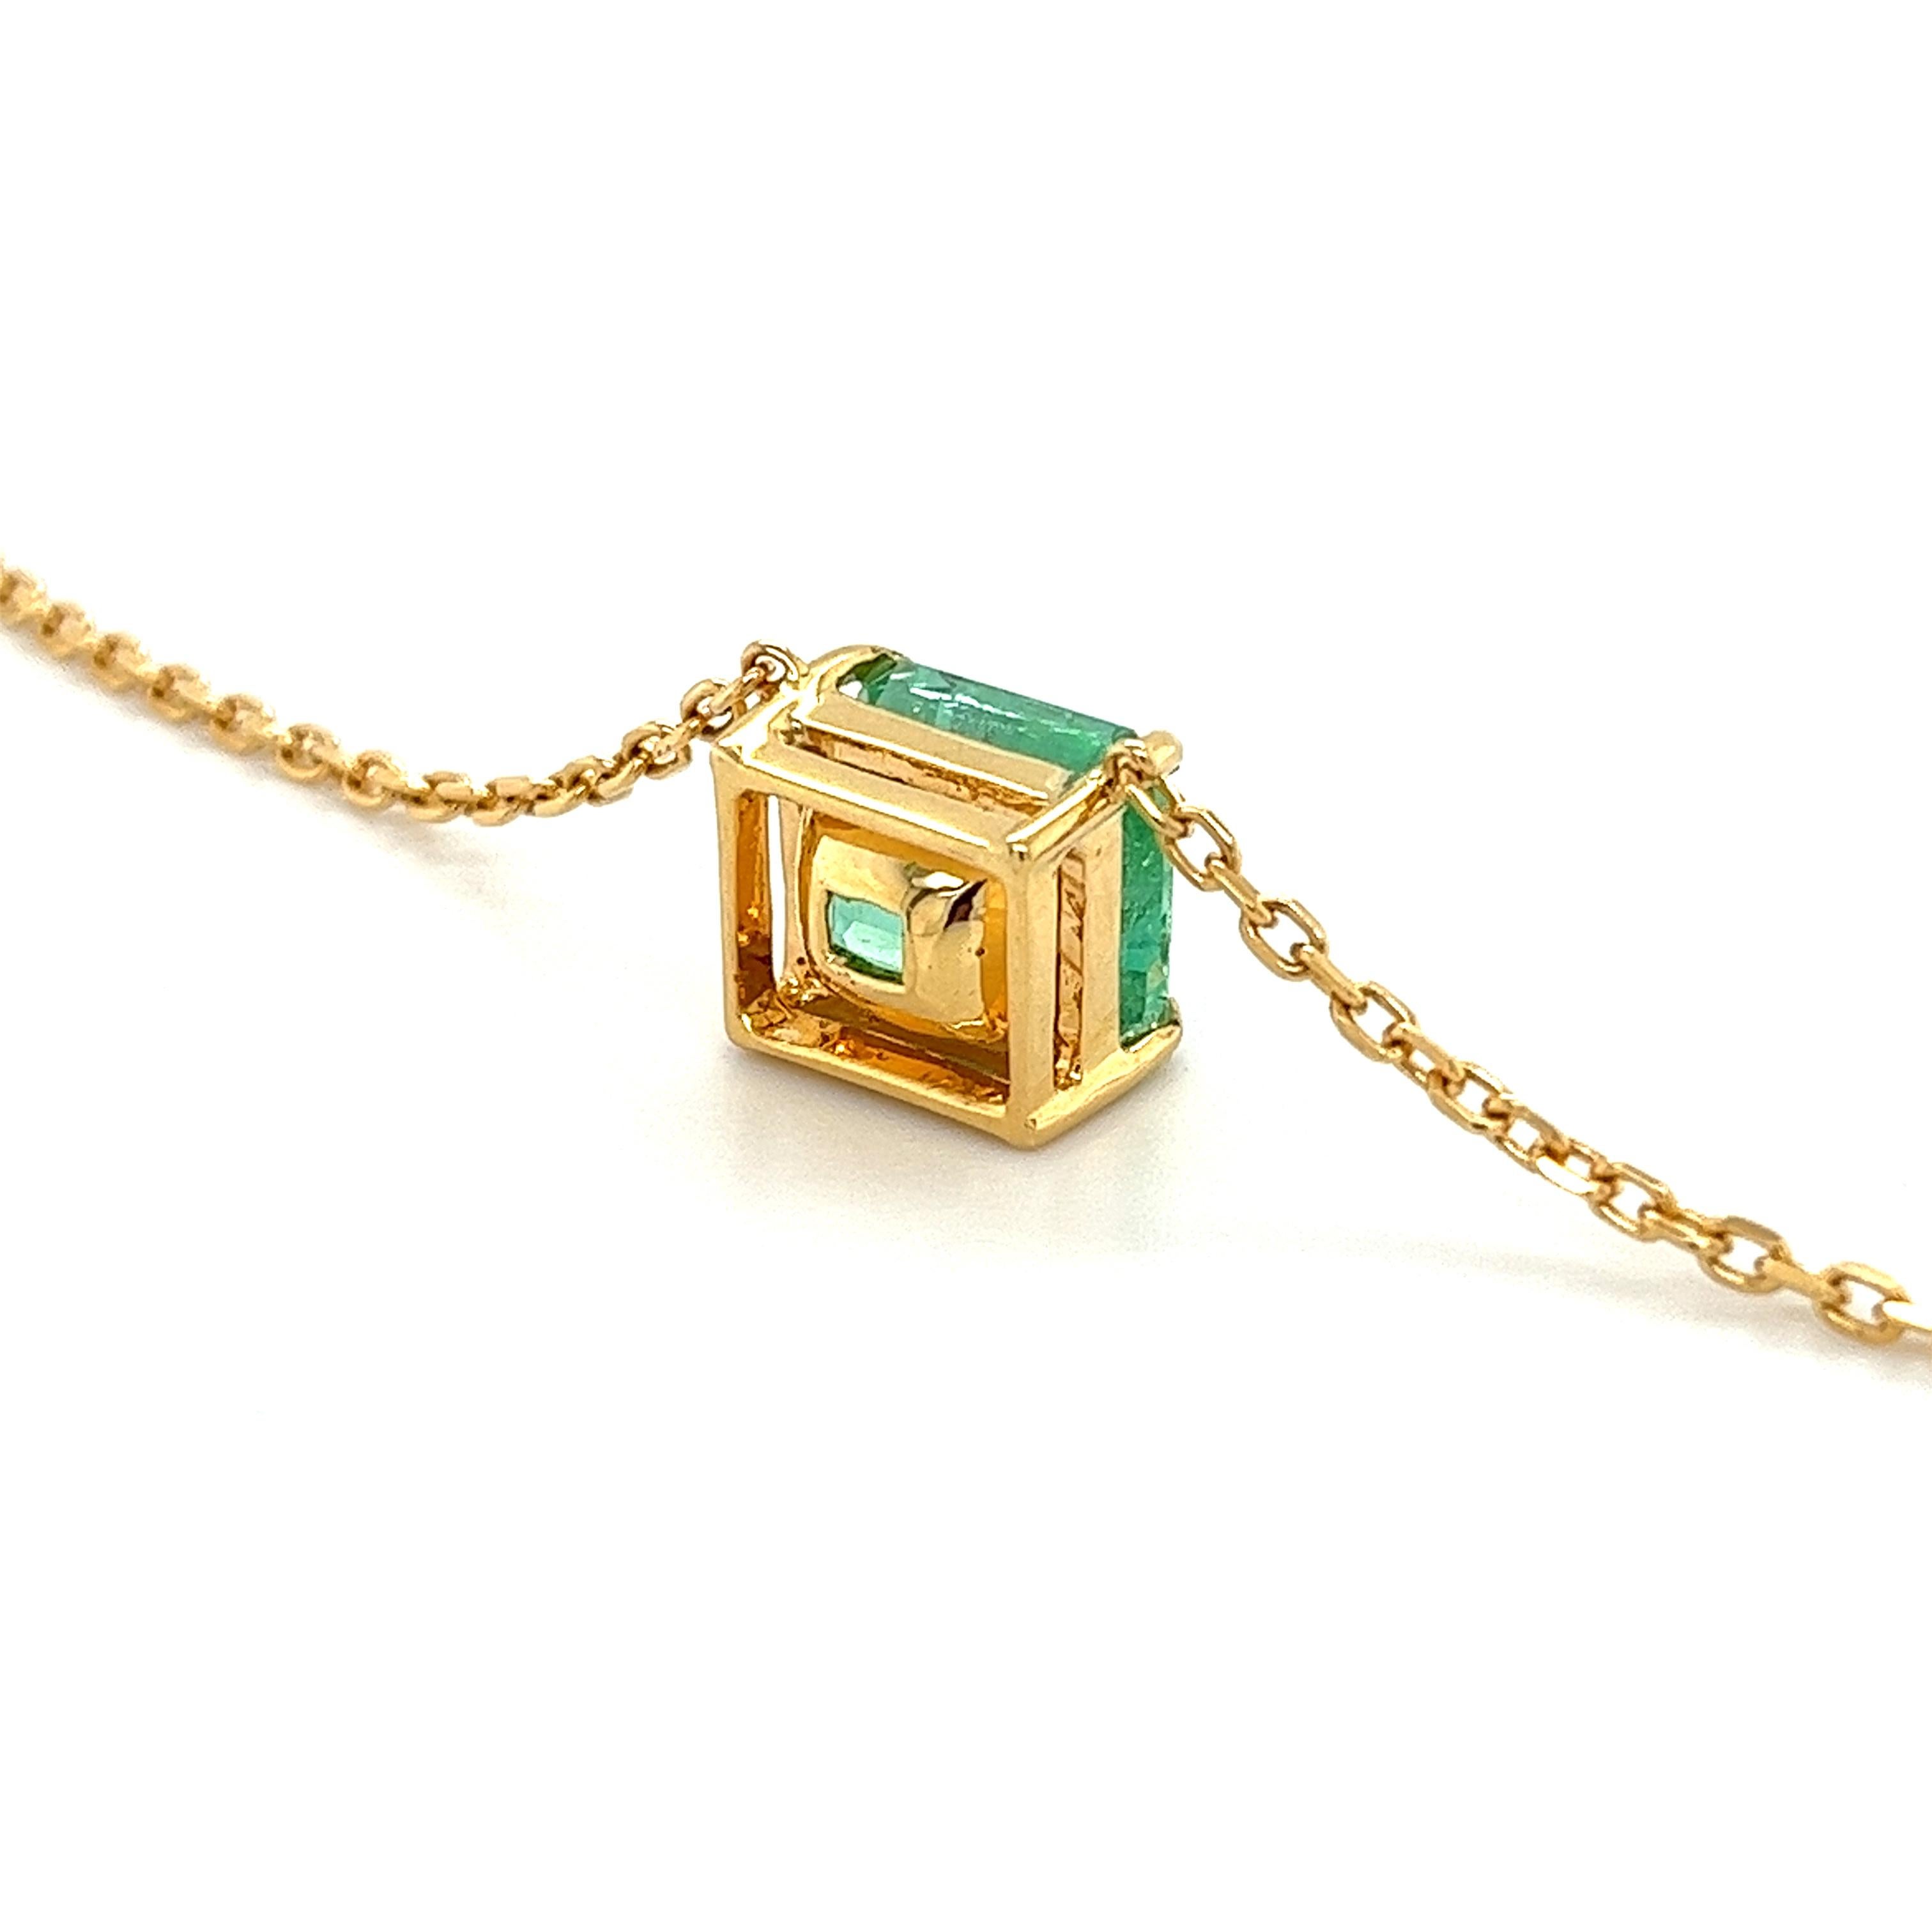 4.38 Carat Colombian Emerald in 18K Gold Floating Connecting Chain Necklace In New Condition For Sale In Miami, FL